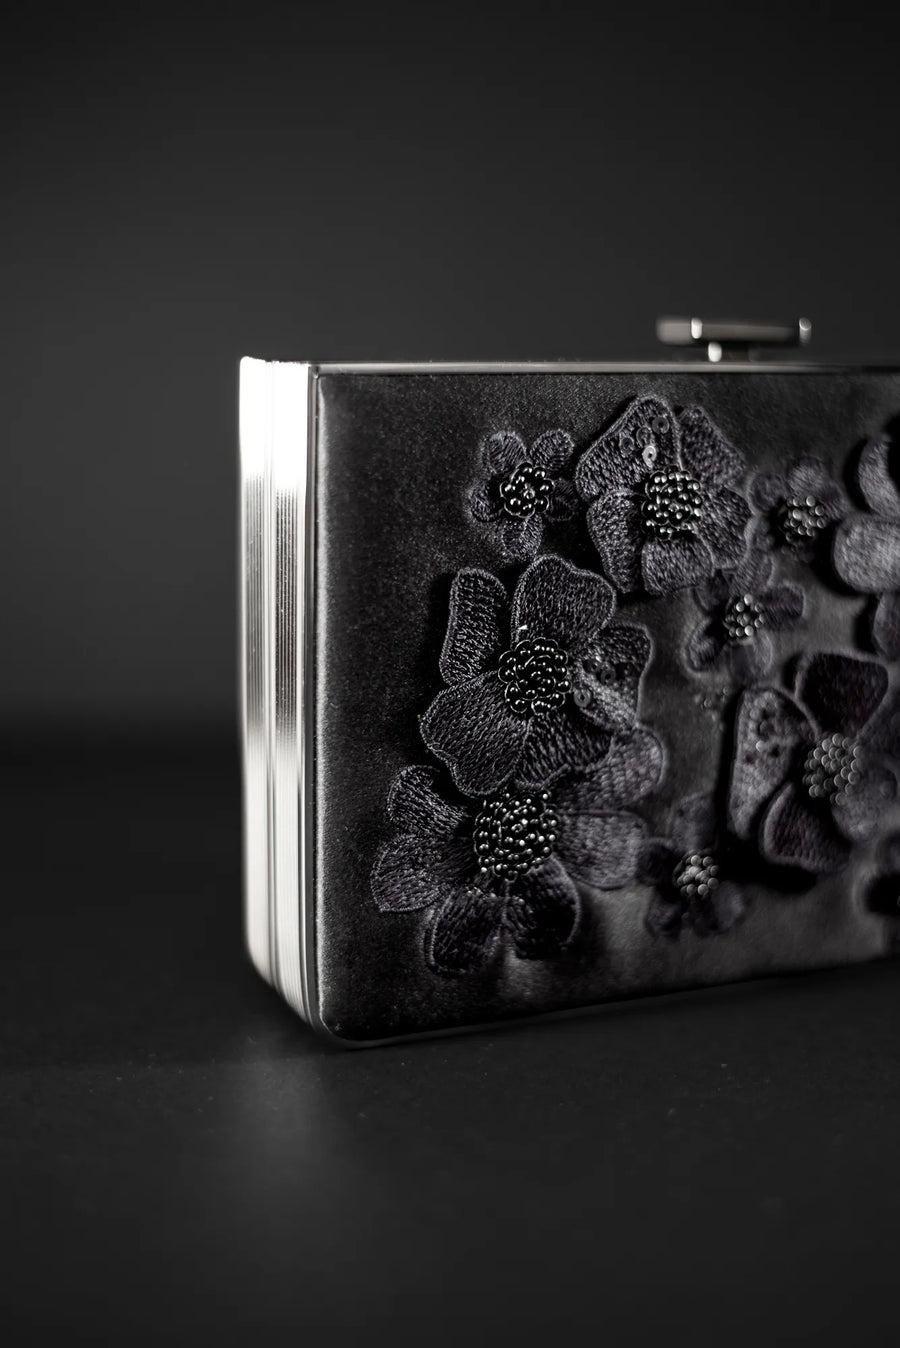 An exclusive The Bella Rosa Collection Venezia Clutch x MICAELA - Black Satin Floral Embroidery with 3D floral embroidery.